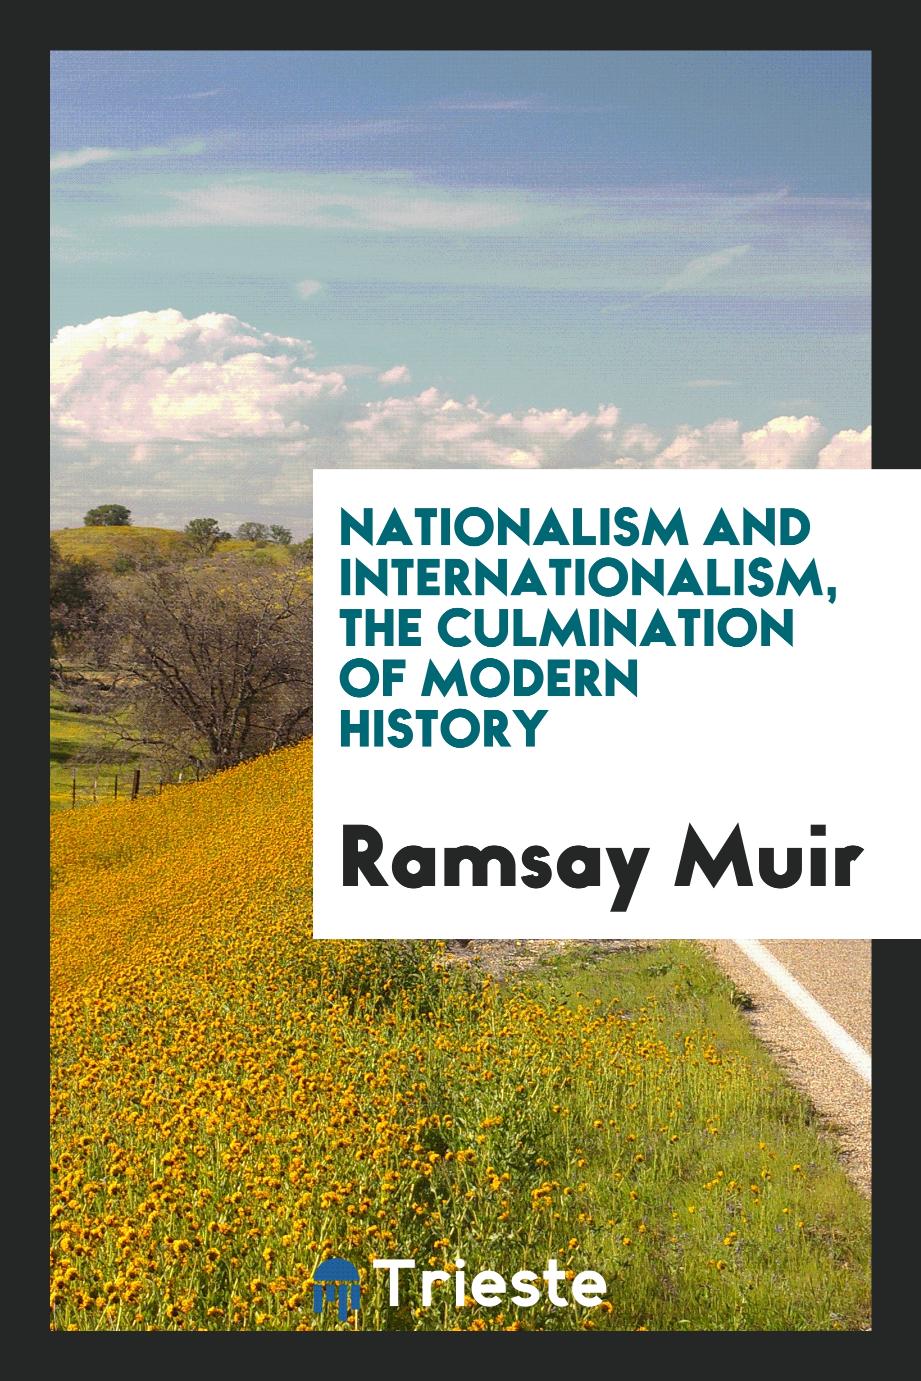 Nationalism and internationalism, the culmination of modern history